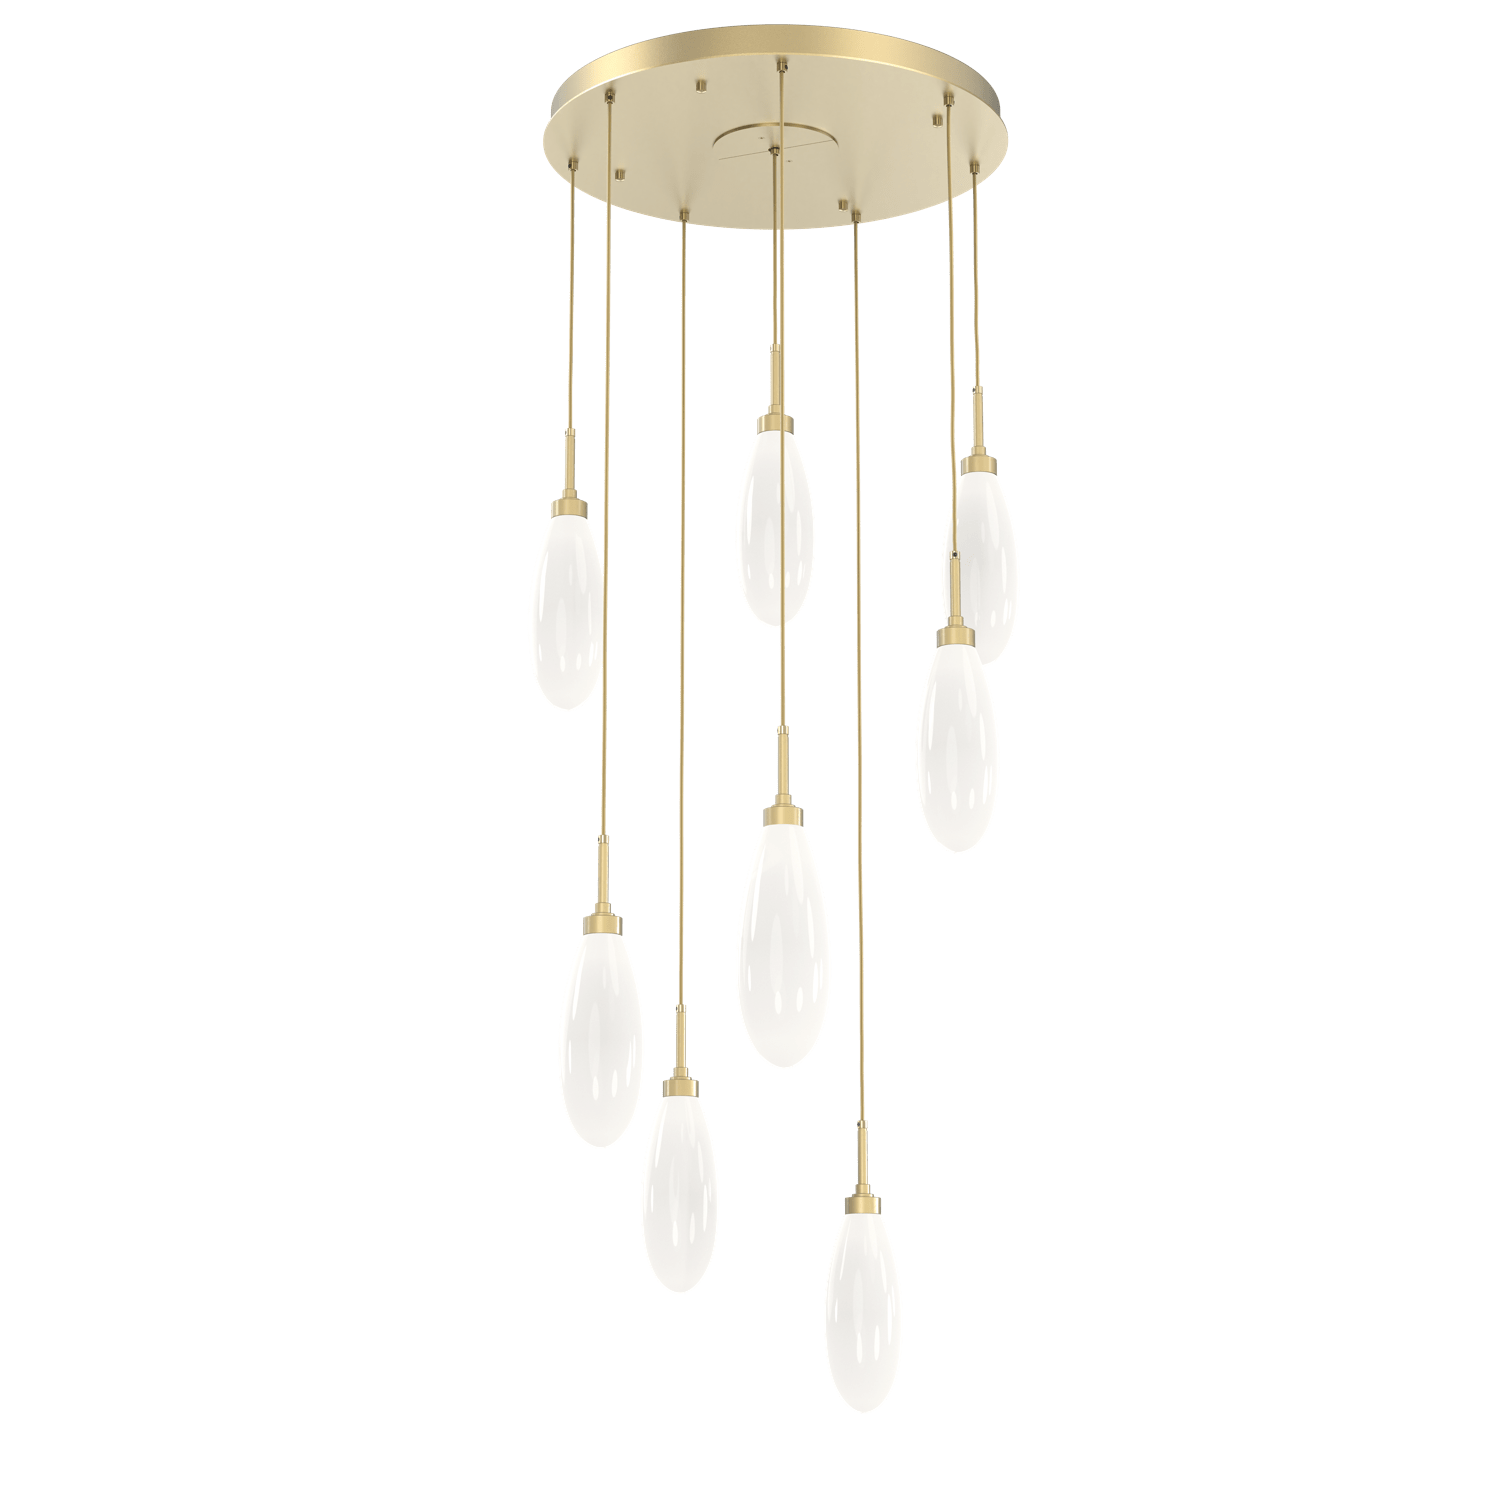 CHB0071-08-GB-WL-LL-Hammerton-Studio-Fiori-8-light-round-pendant-chandelier-with-gilded-brass-finish-and-opal-white-glass-shades-and-LED-lamping